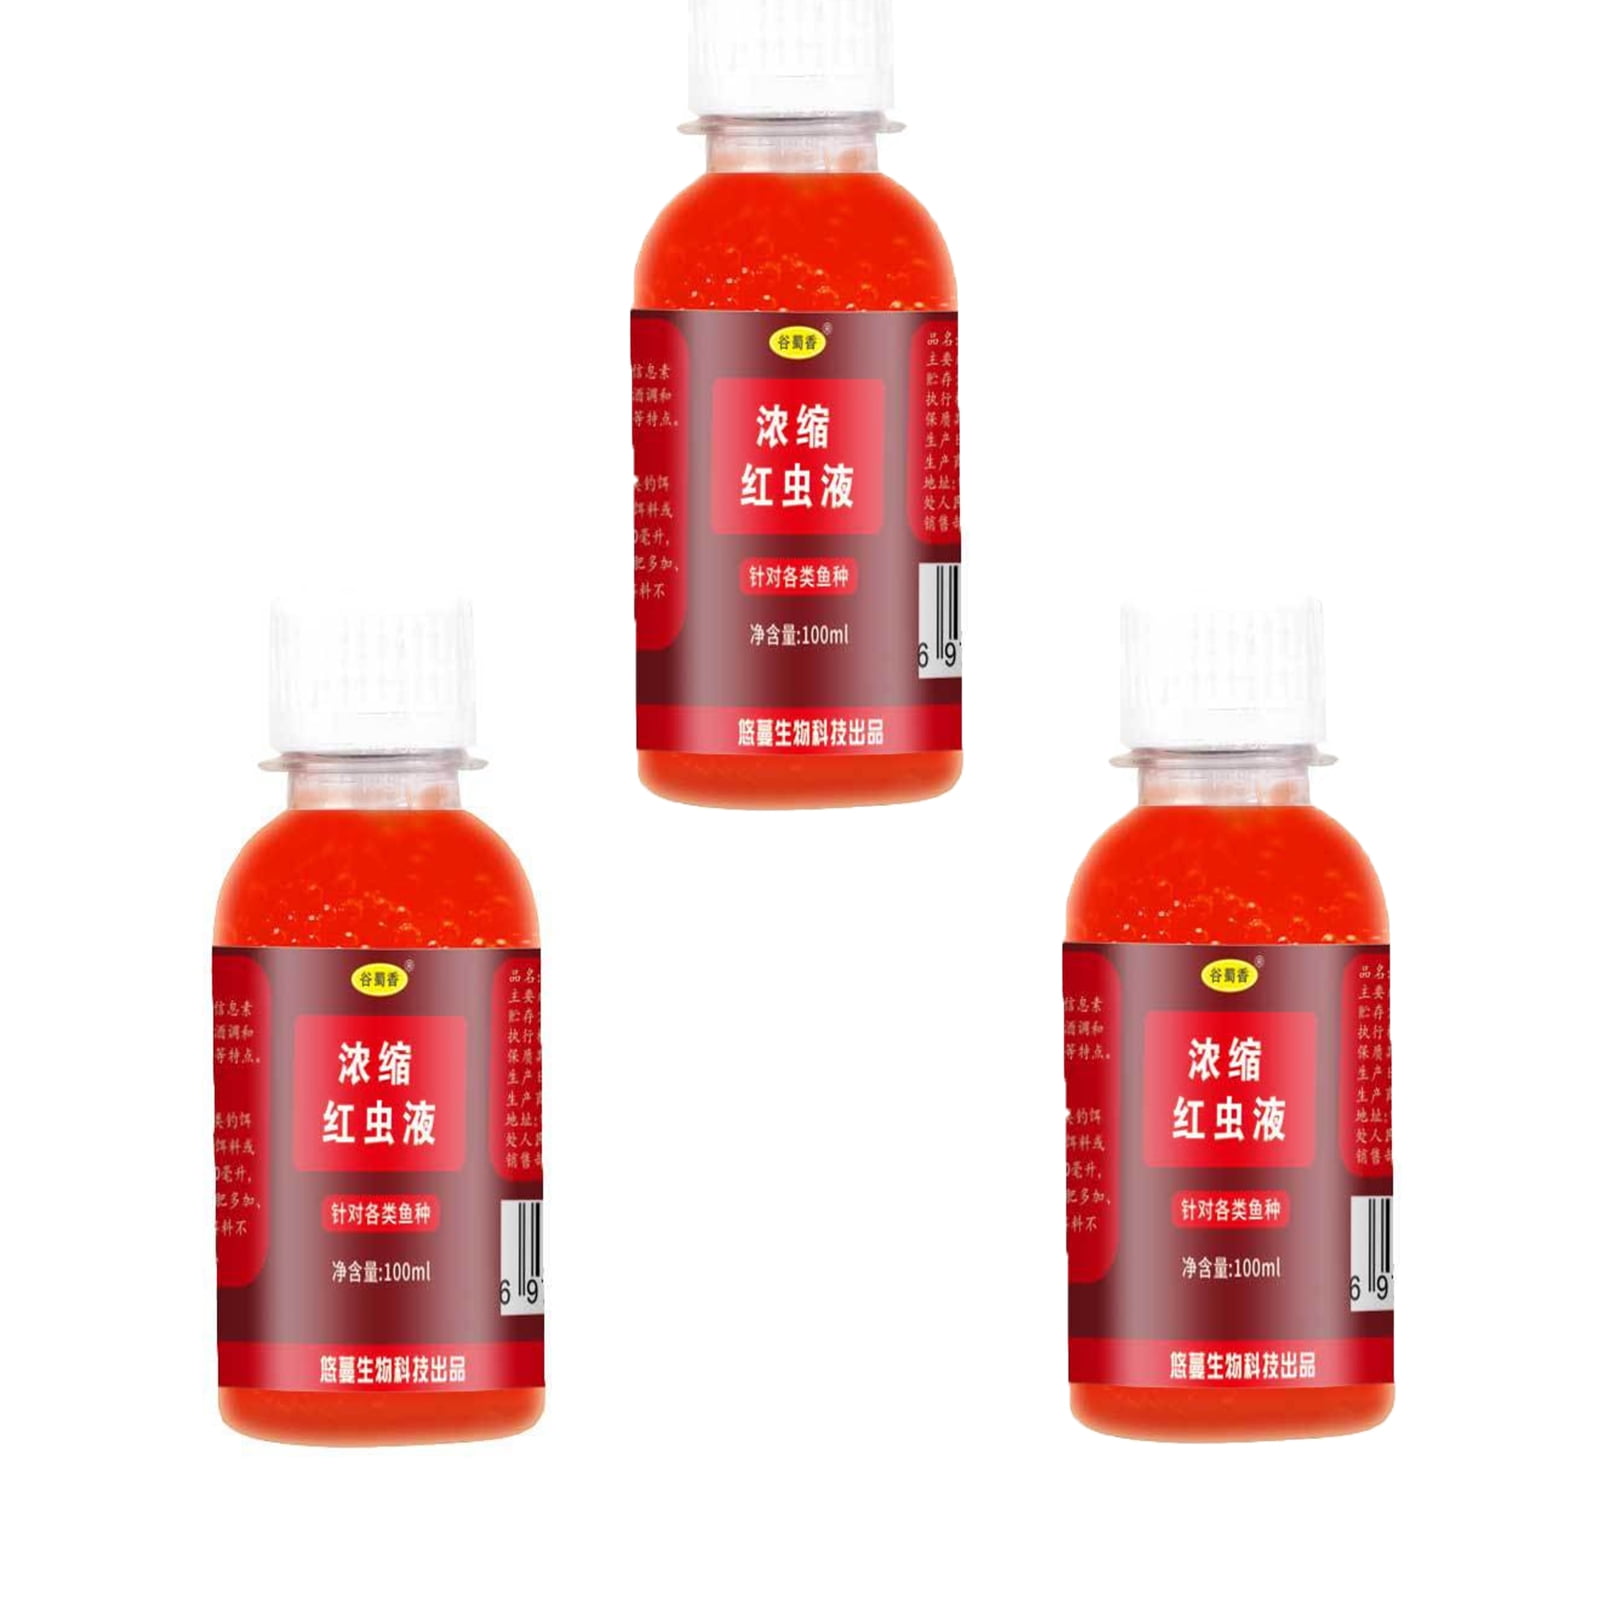 Chamoist Red40 Fishing Liquid,Fish Attractant,Red Worm Scent Fish  Attractants For Baits,Strong Fish Attractant High Concentrated Red Worm Liquid  Bait Fish Additive,Red Worm Fish Scent Enhancer,100ml 